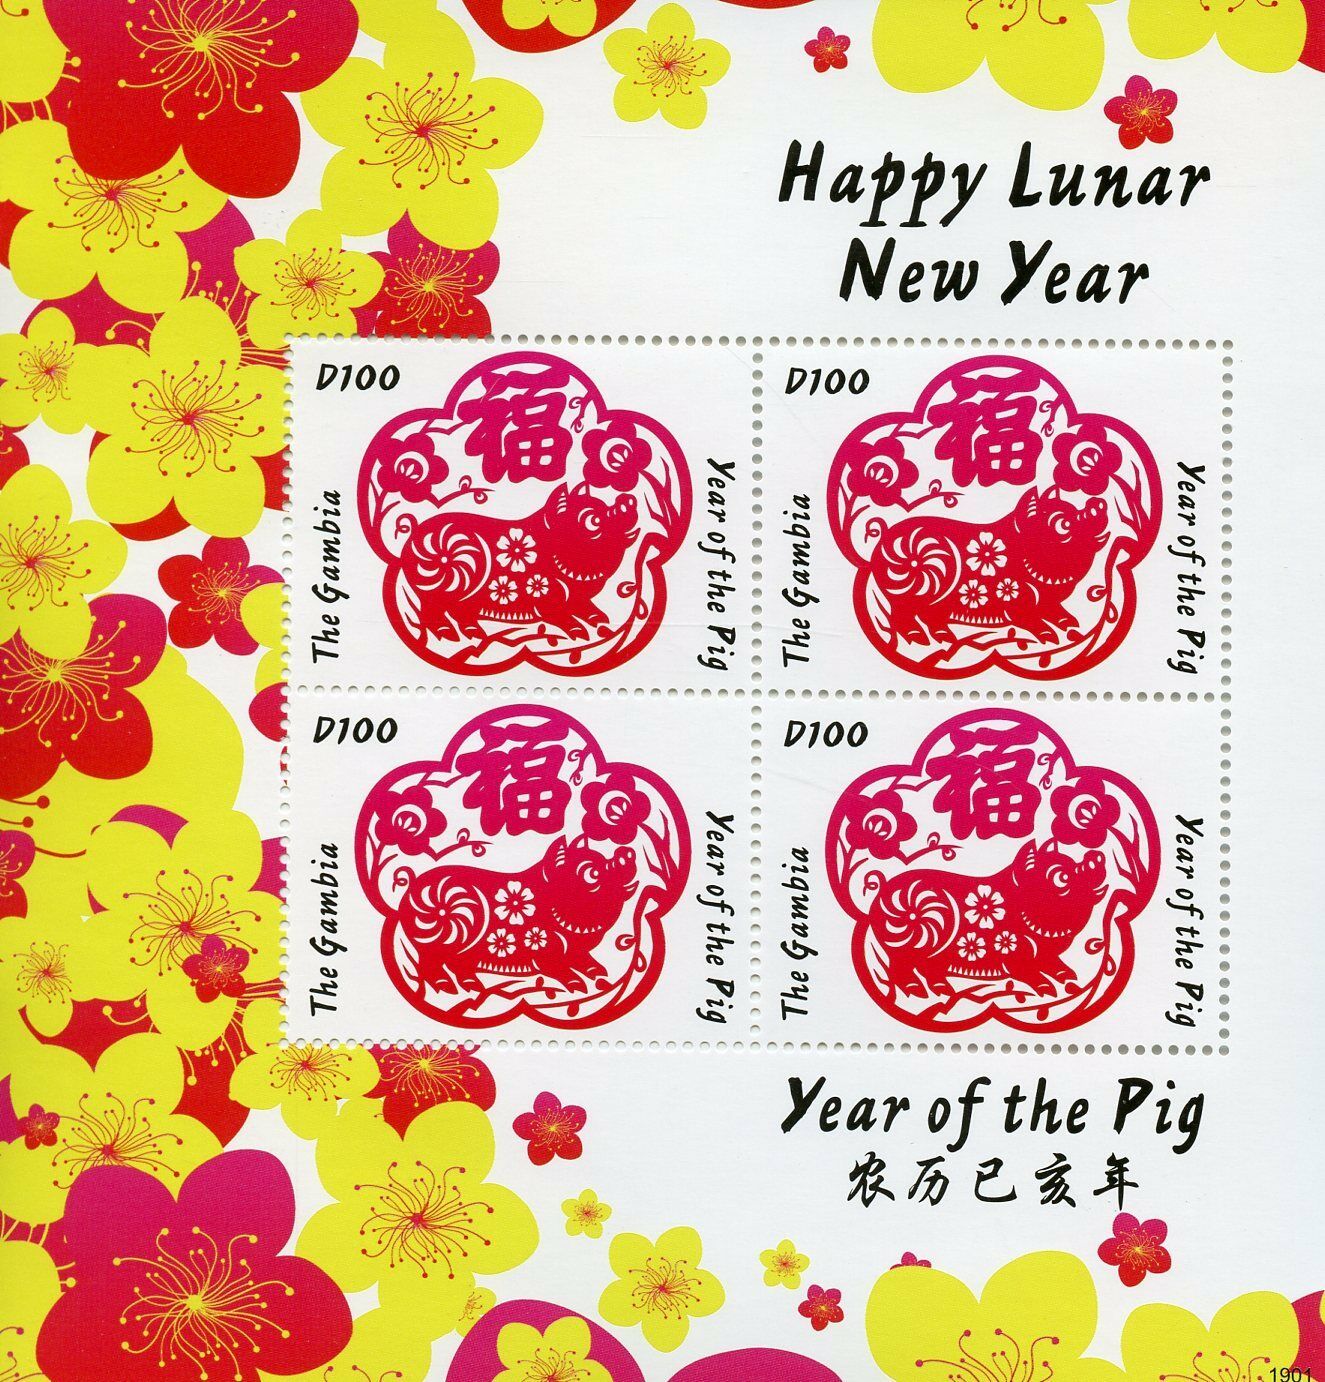 Gambia 2019 MNH Year of Pig 4v M/S Chinese Lunar New Year Stamps